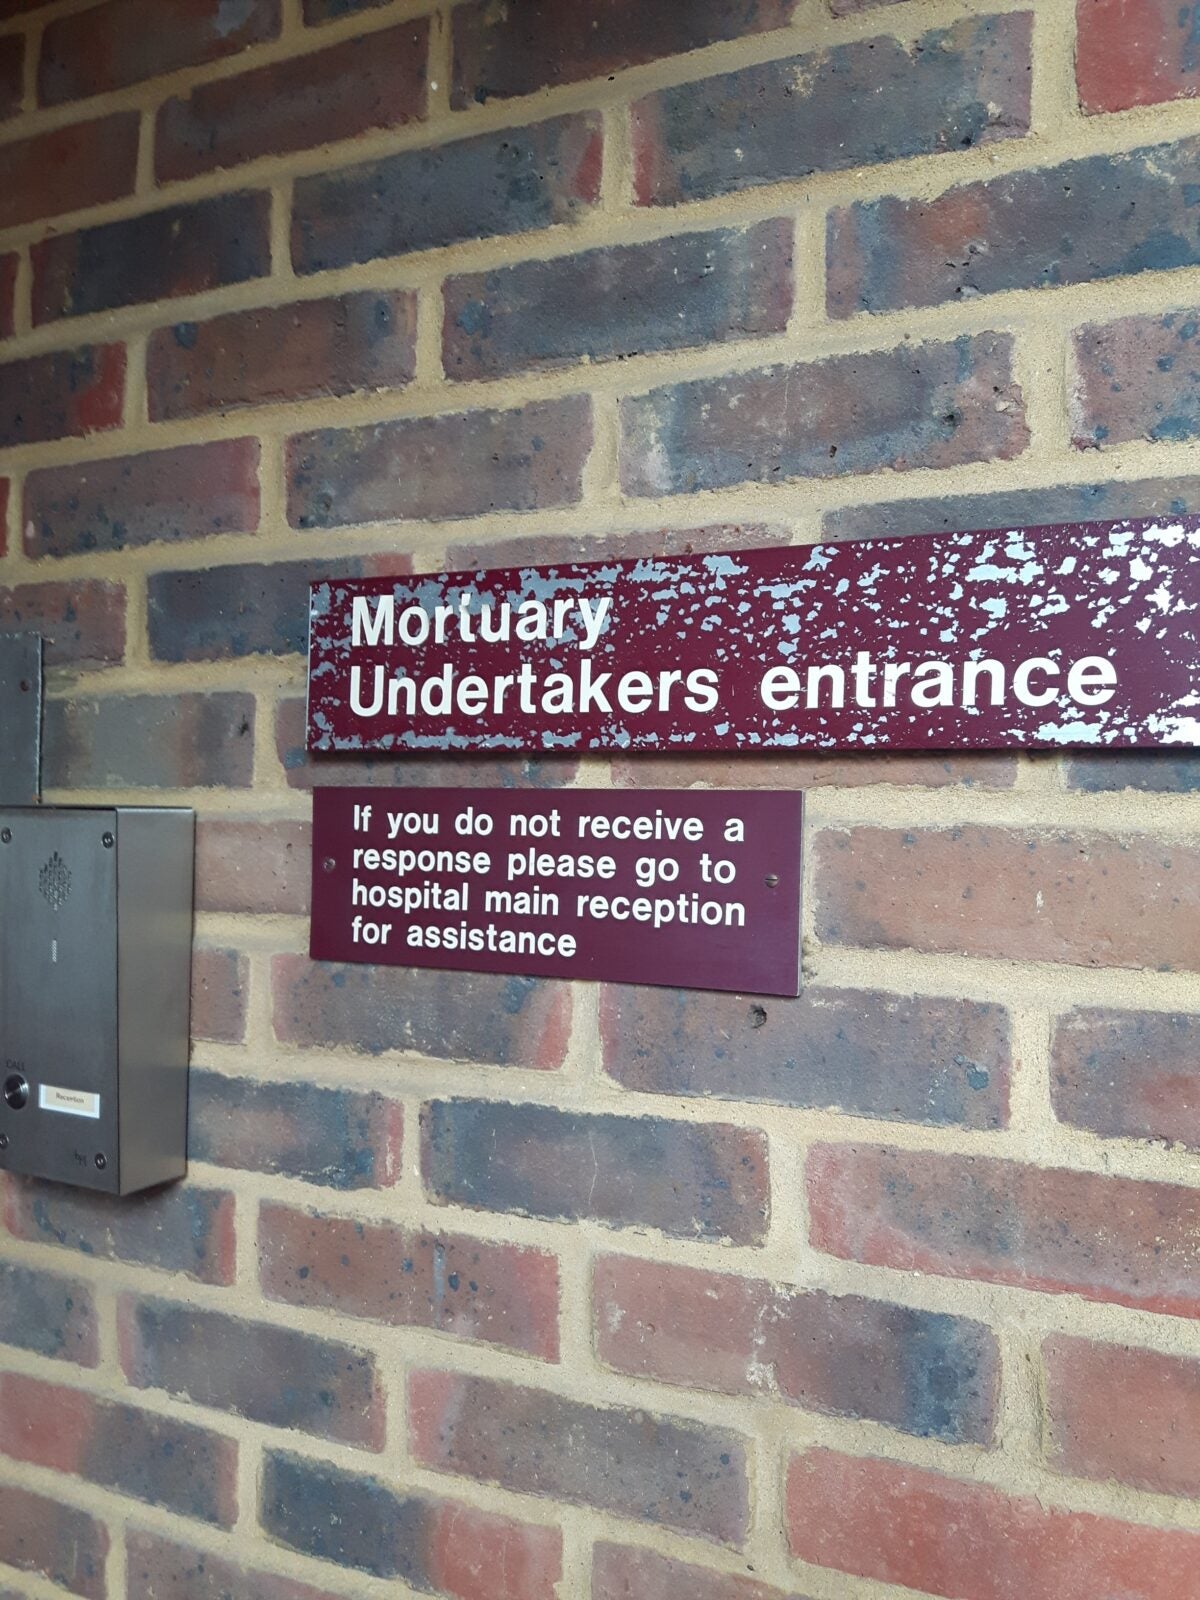 A sign on a brick wall that writes "Mortuary Undertakers entrance" at the grounds of Lewisham Hospital London, UK.